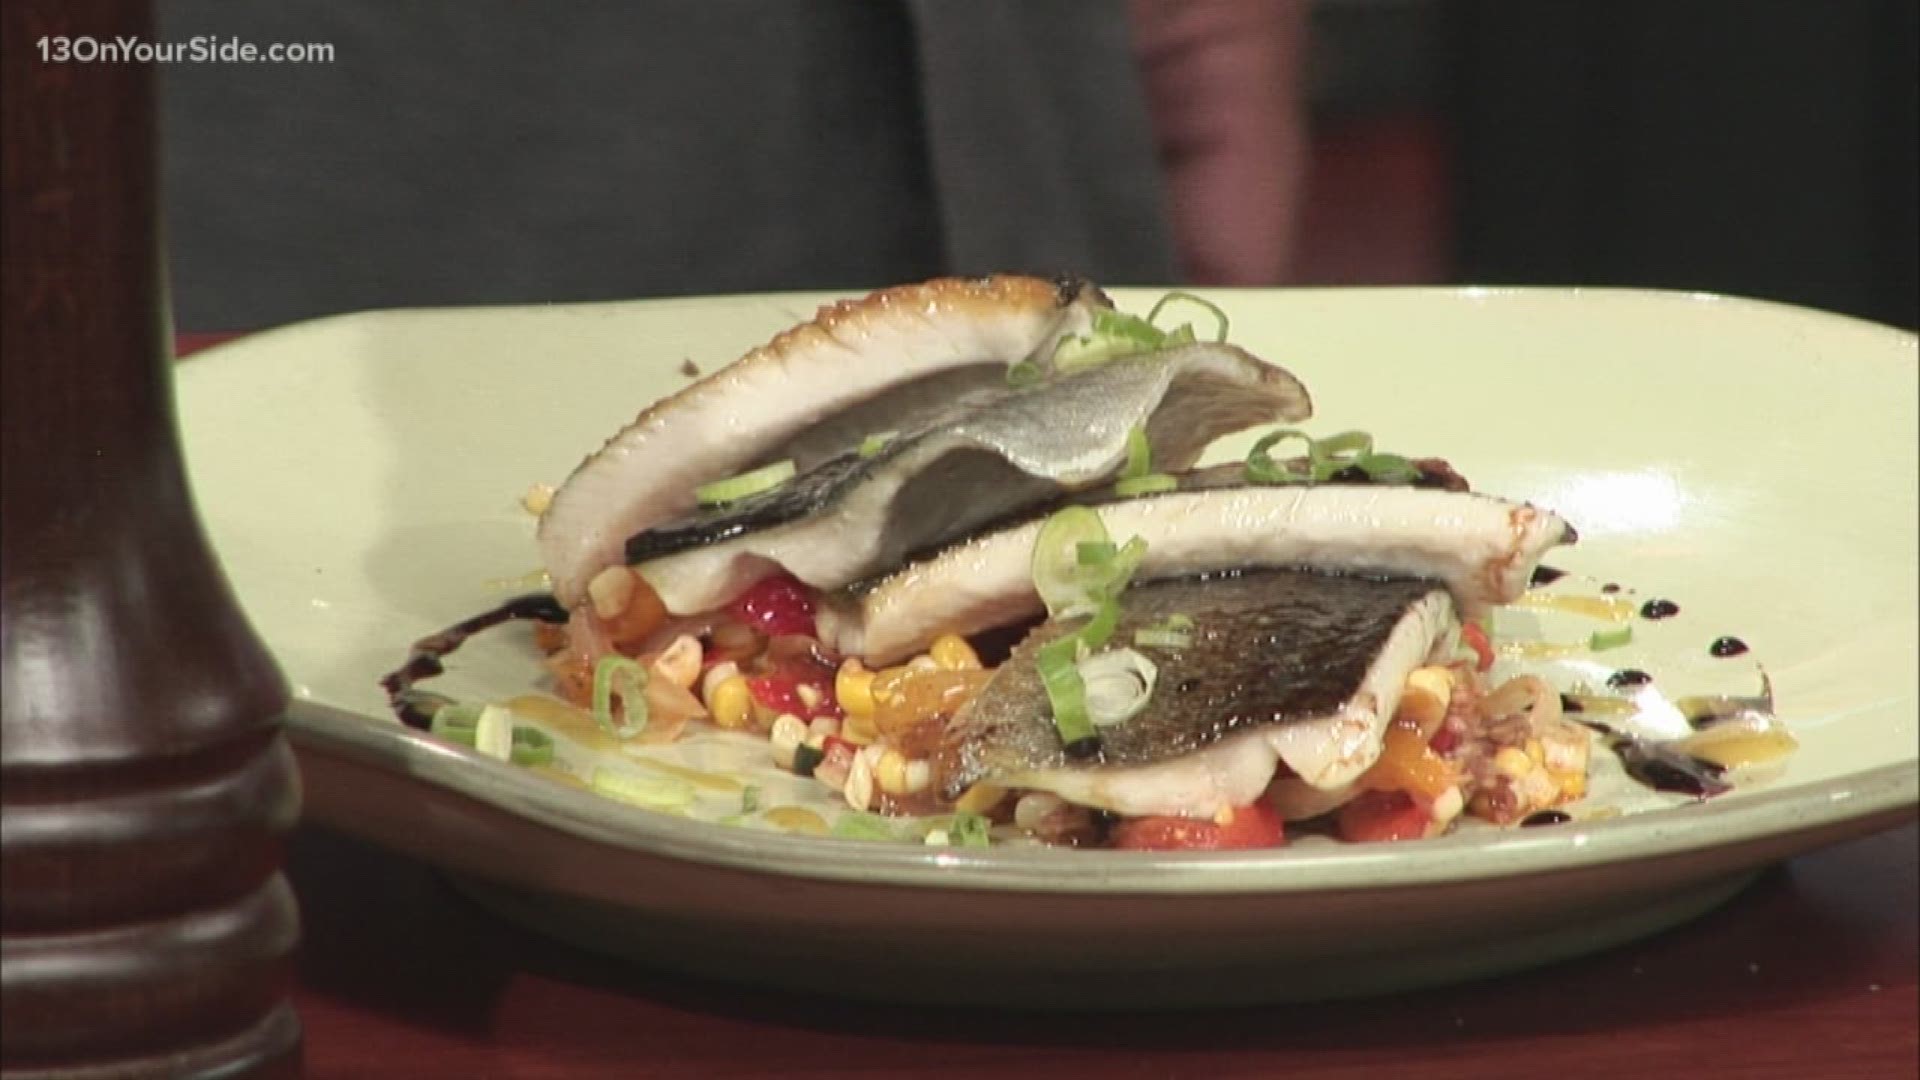 Each summer, Grand Rapids celebrates the great dining options in the city with Restaurant Week GR. More than 70 restaurants are participating in this year's event, including Osteria Rossa. We invited them into the studio to show us some of what they have for their customers.